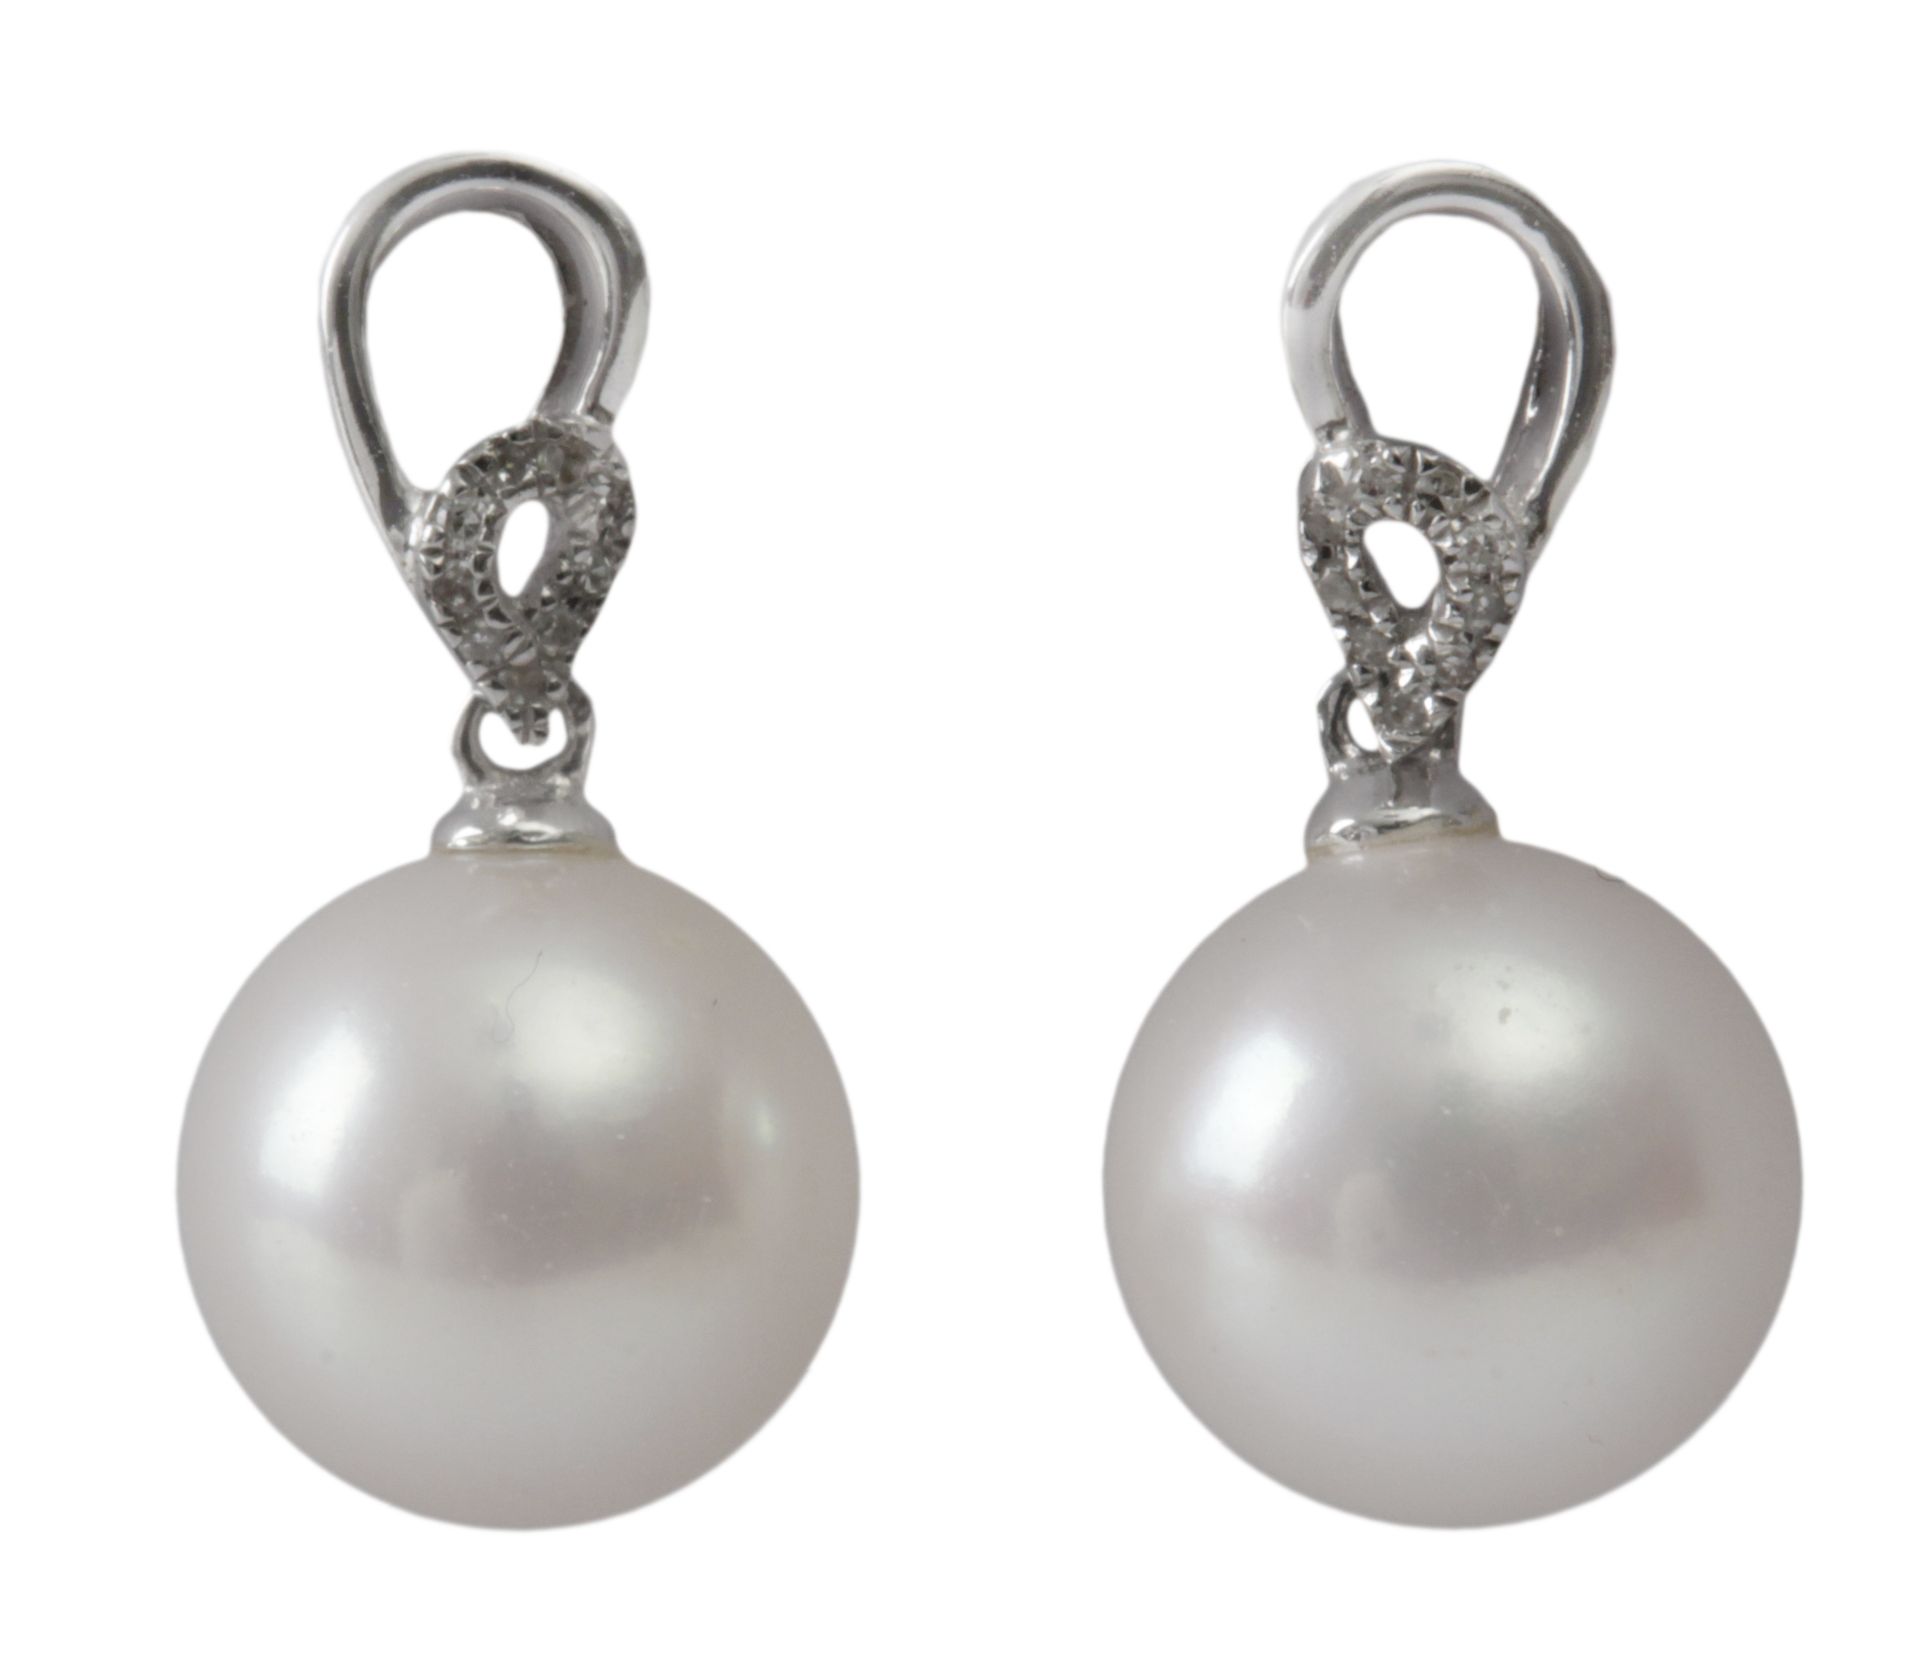 Brilliant cut diamonds and cultured pearls long earrings with an 18k. white gold setting